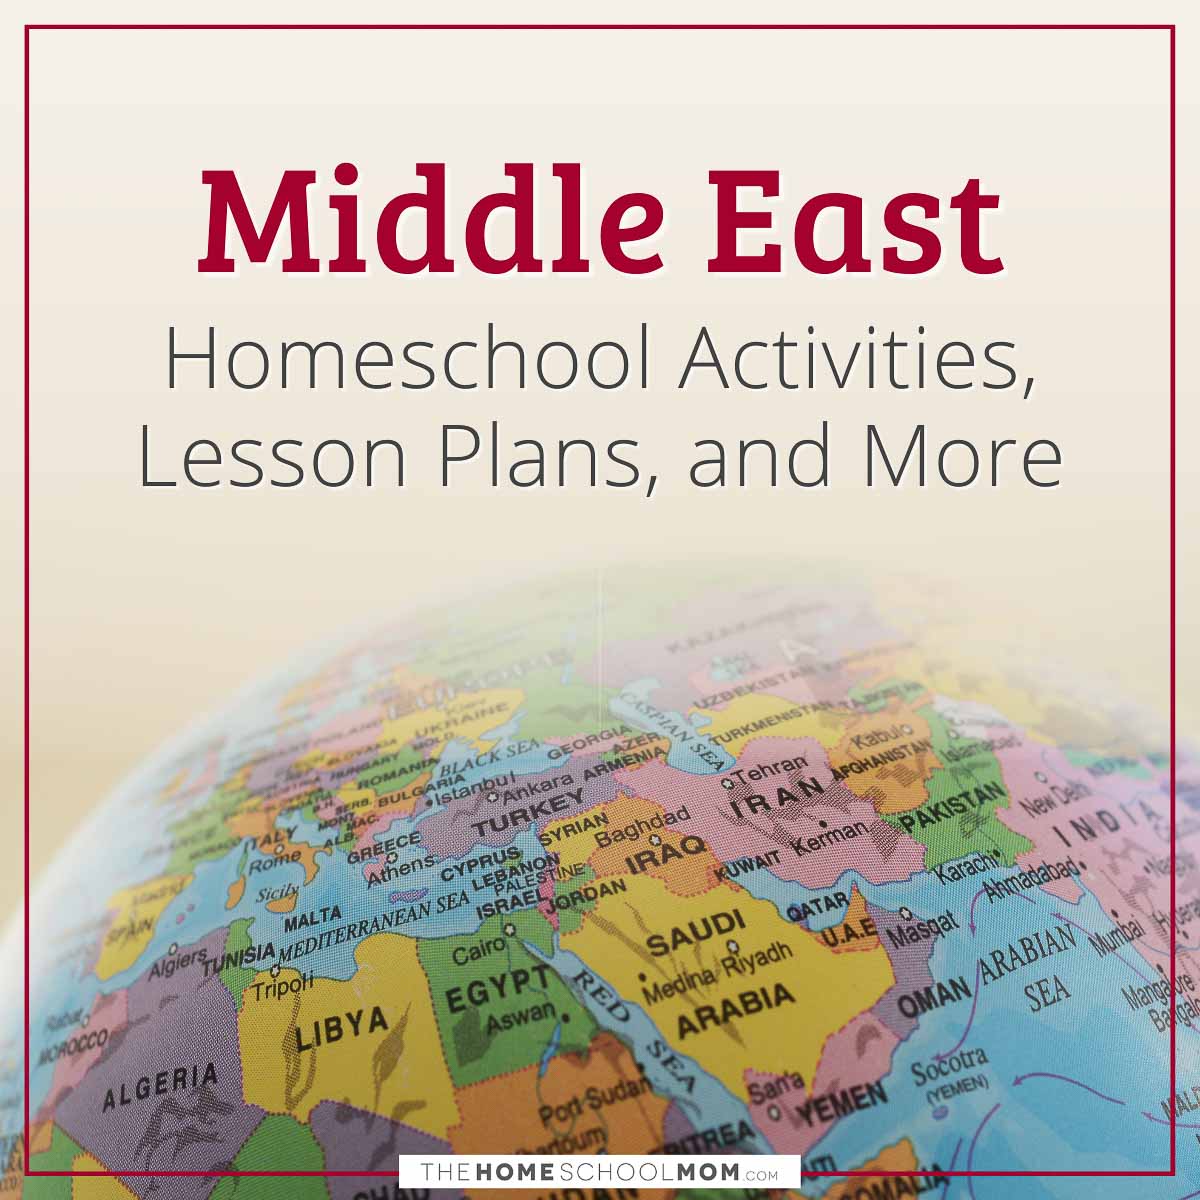 Middle East Homeschool Activities, Lesson Plans, and More from TheHomeschoolMom.com